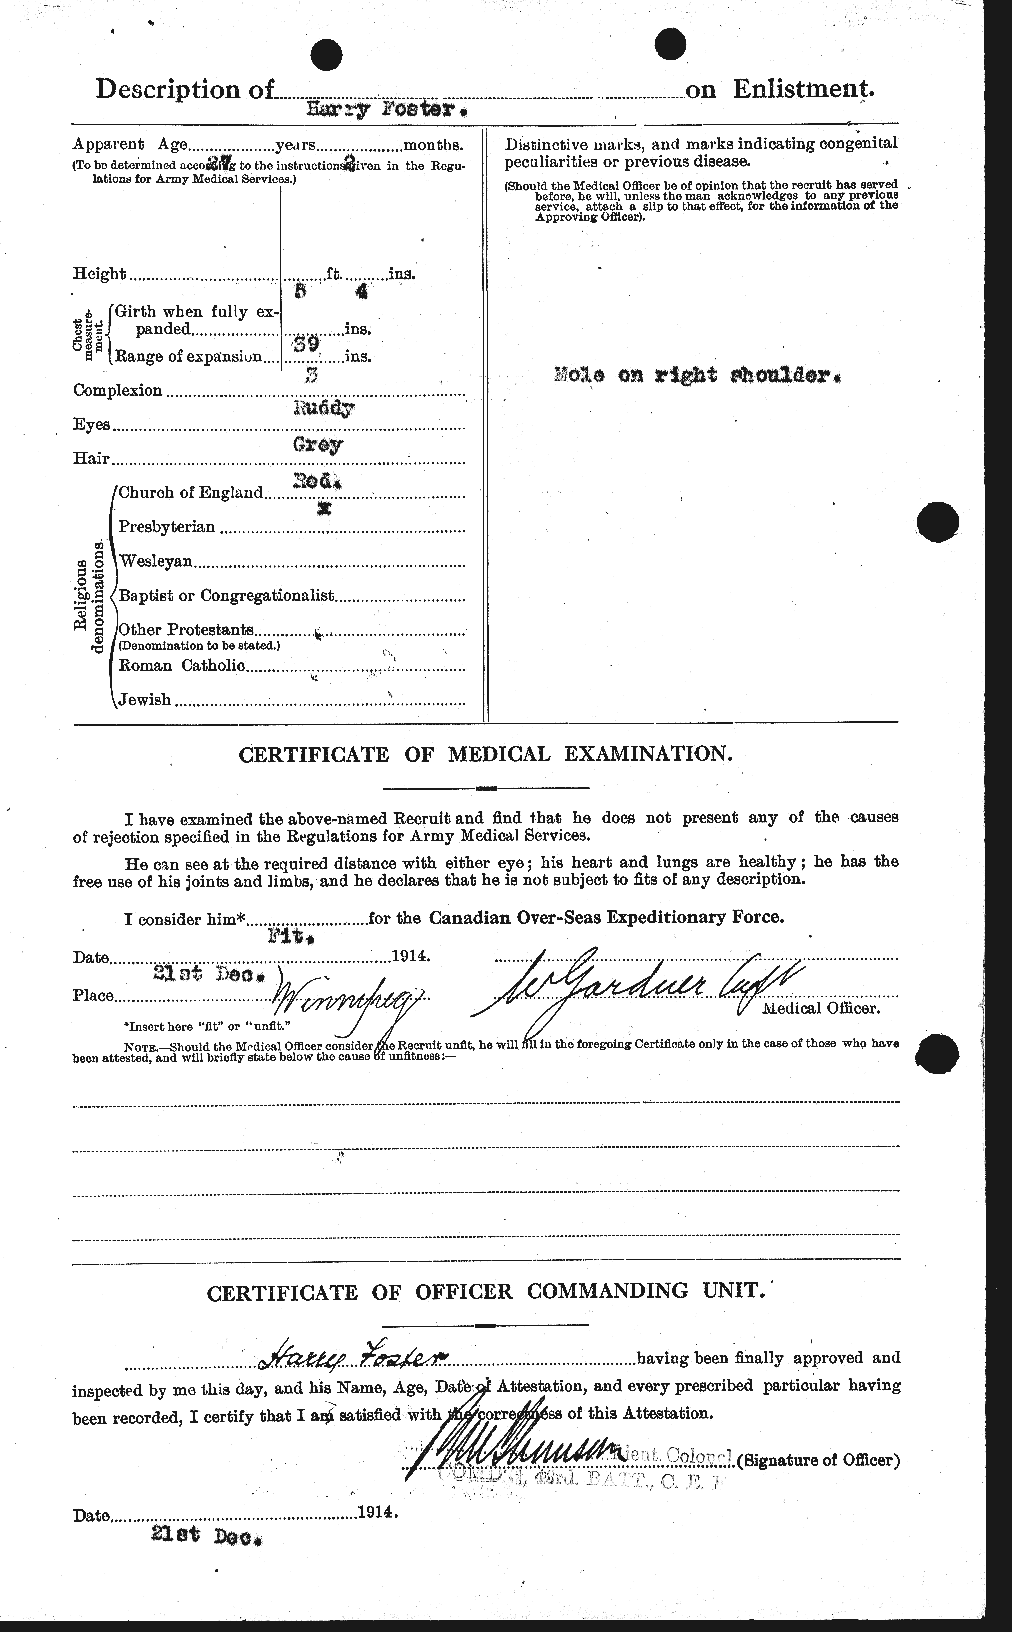 Personnel Records of the First World War - CEF 330737b